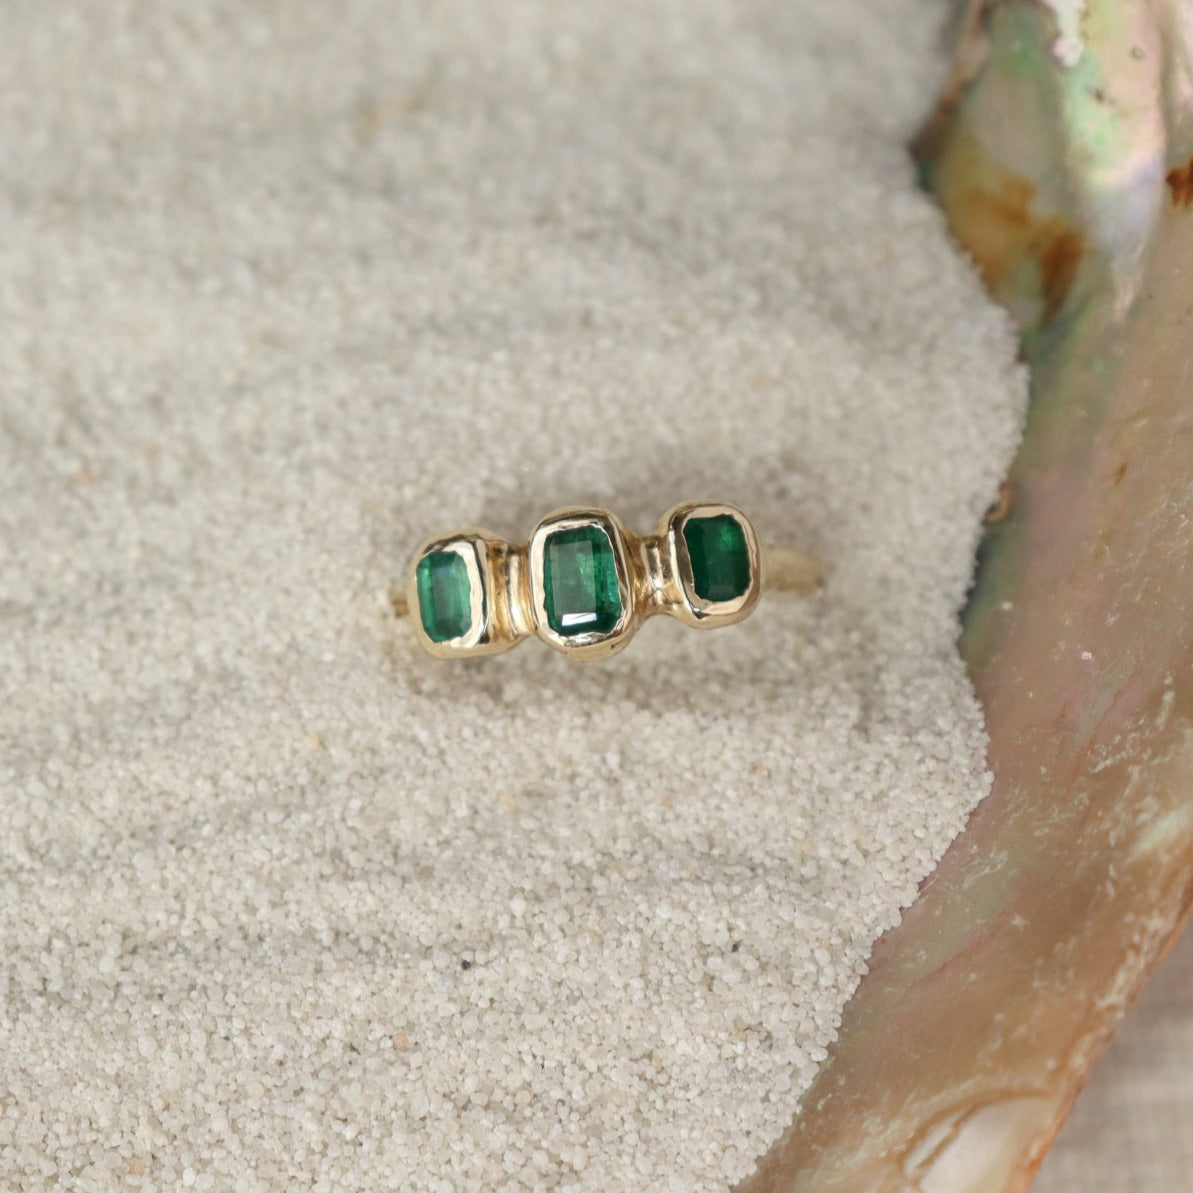 Three little emerald cut emeralds are embedded into a 14k gold ring giving it an organic look.